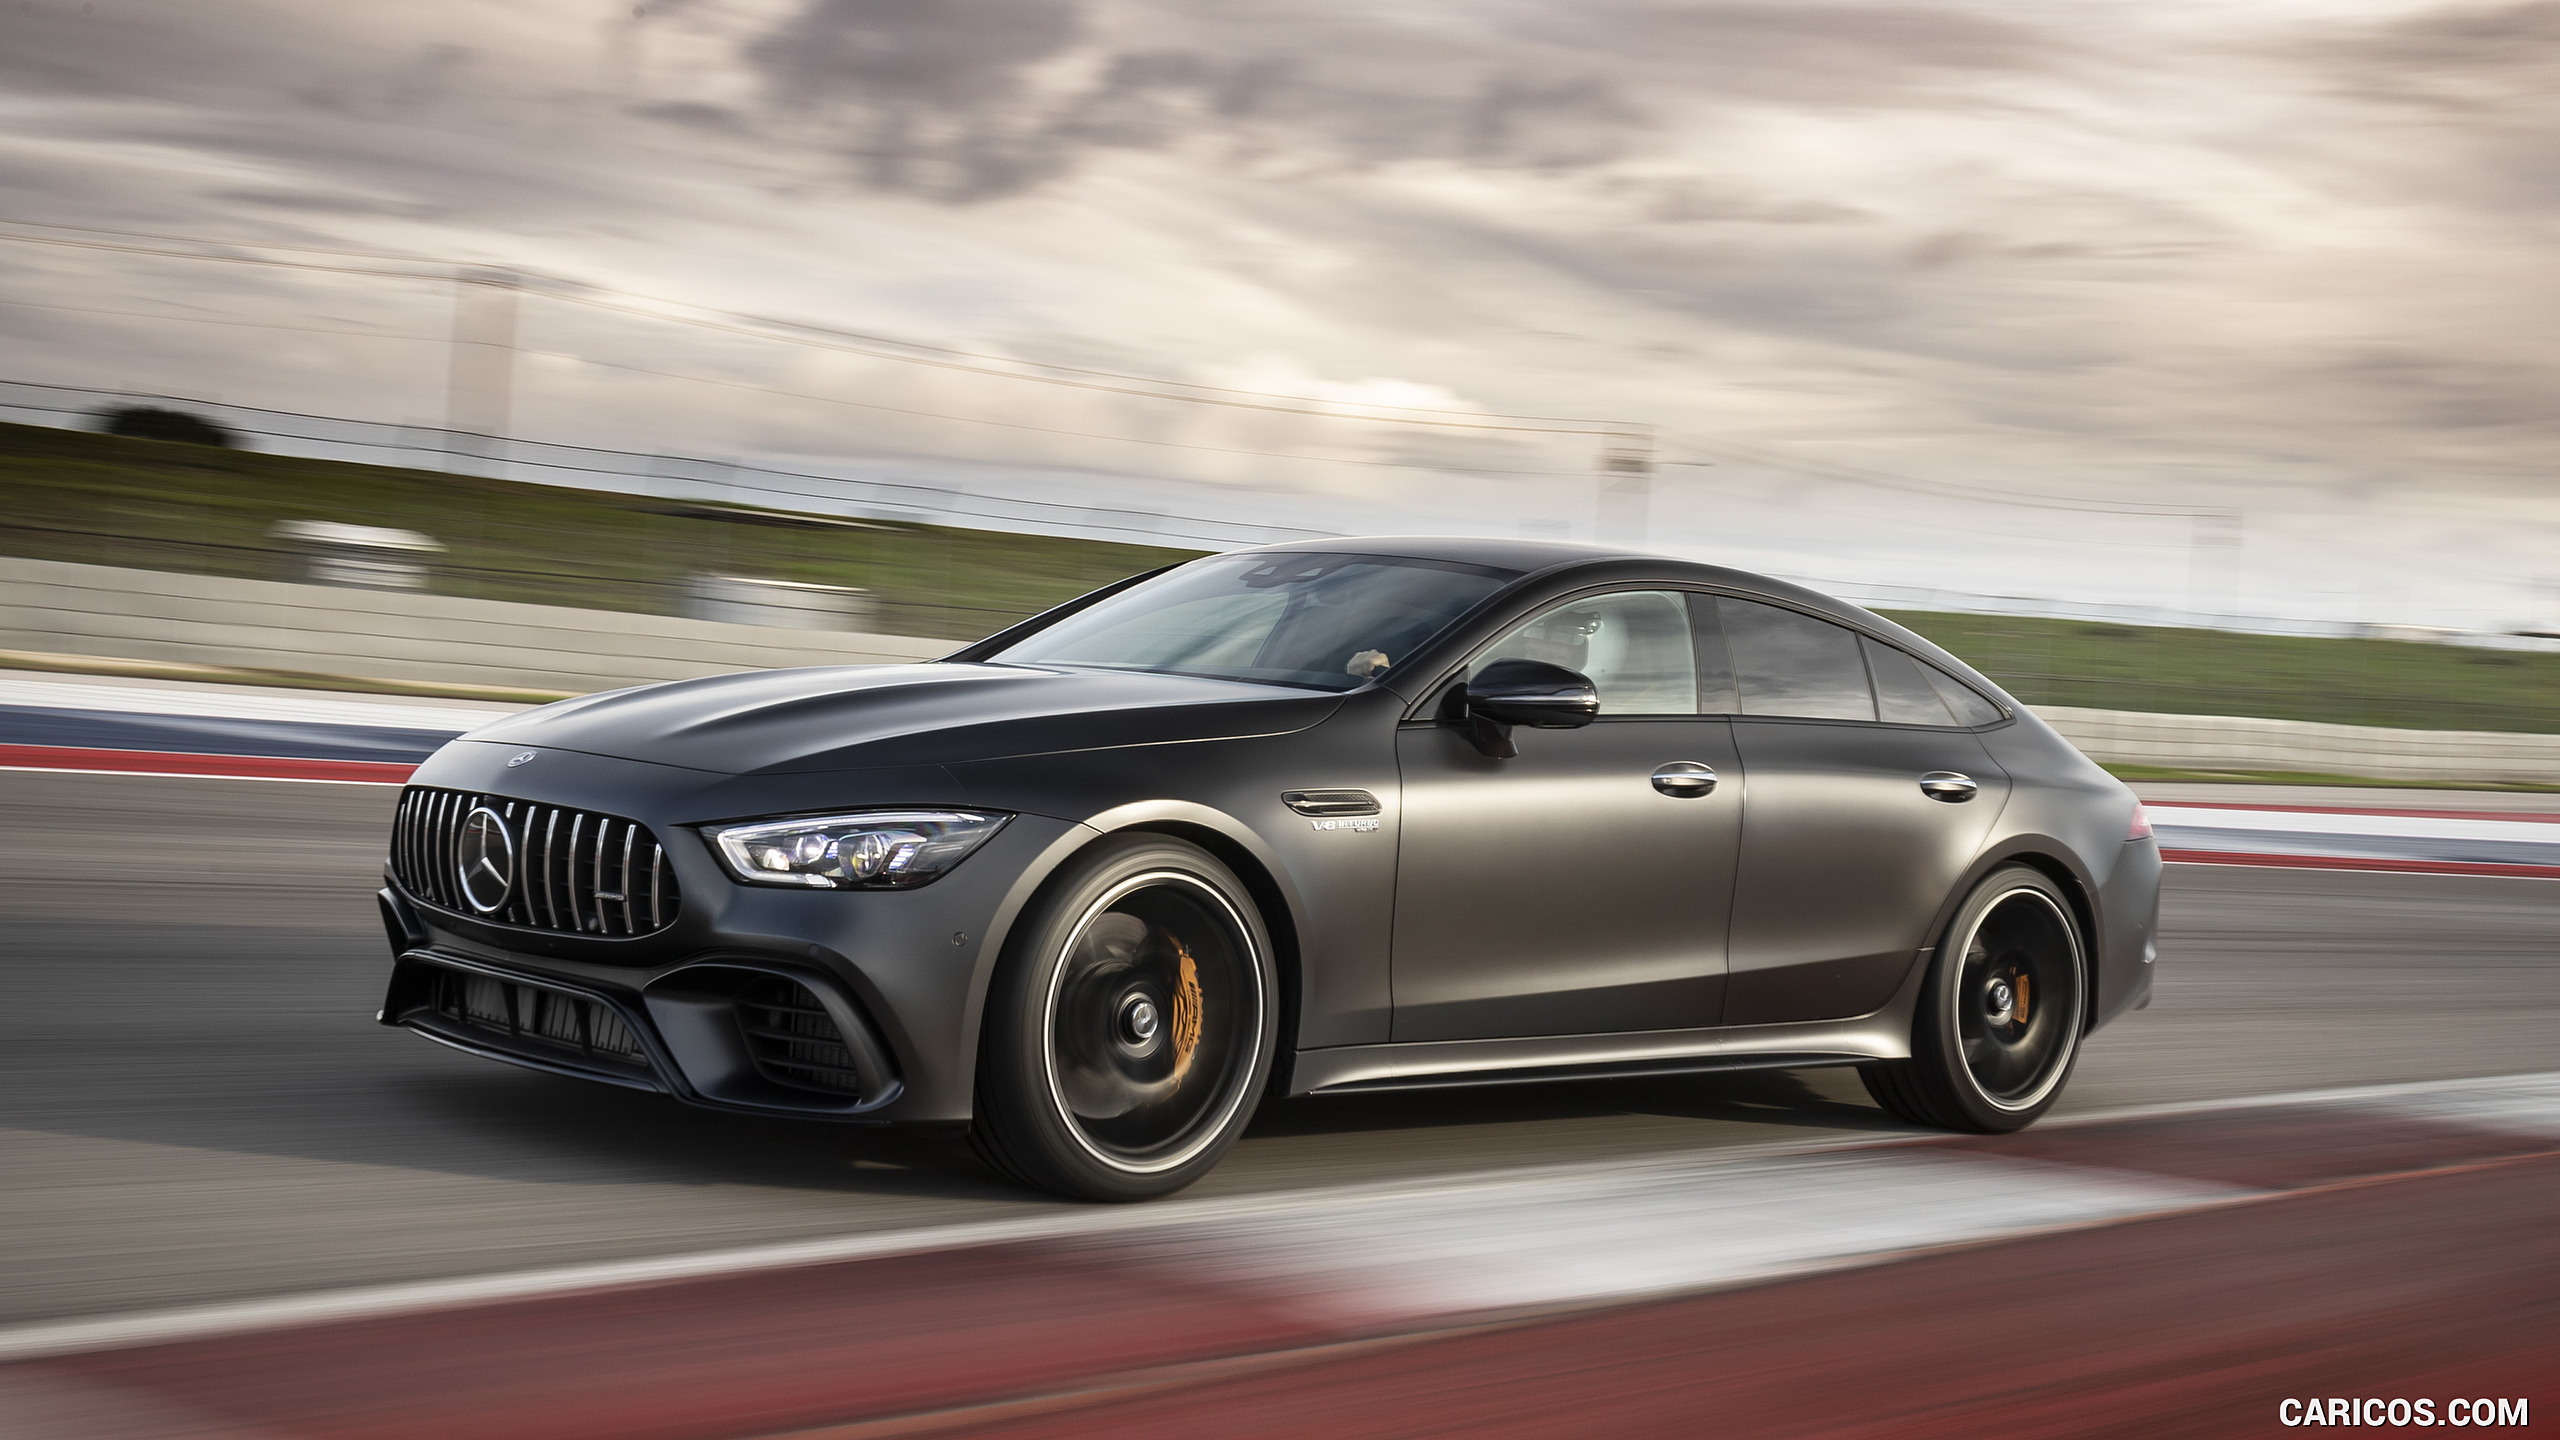 2019 Mercedes-AMG GT 63 S 4MATIC+ 4-Door Coupe - Front Three-Quarter, #176 of 427